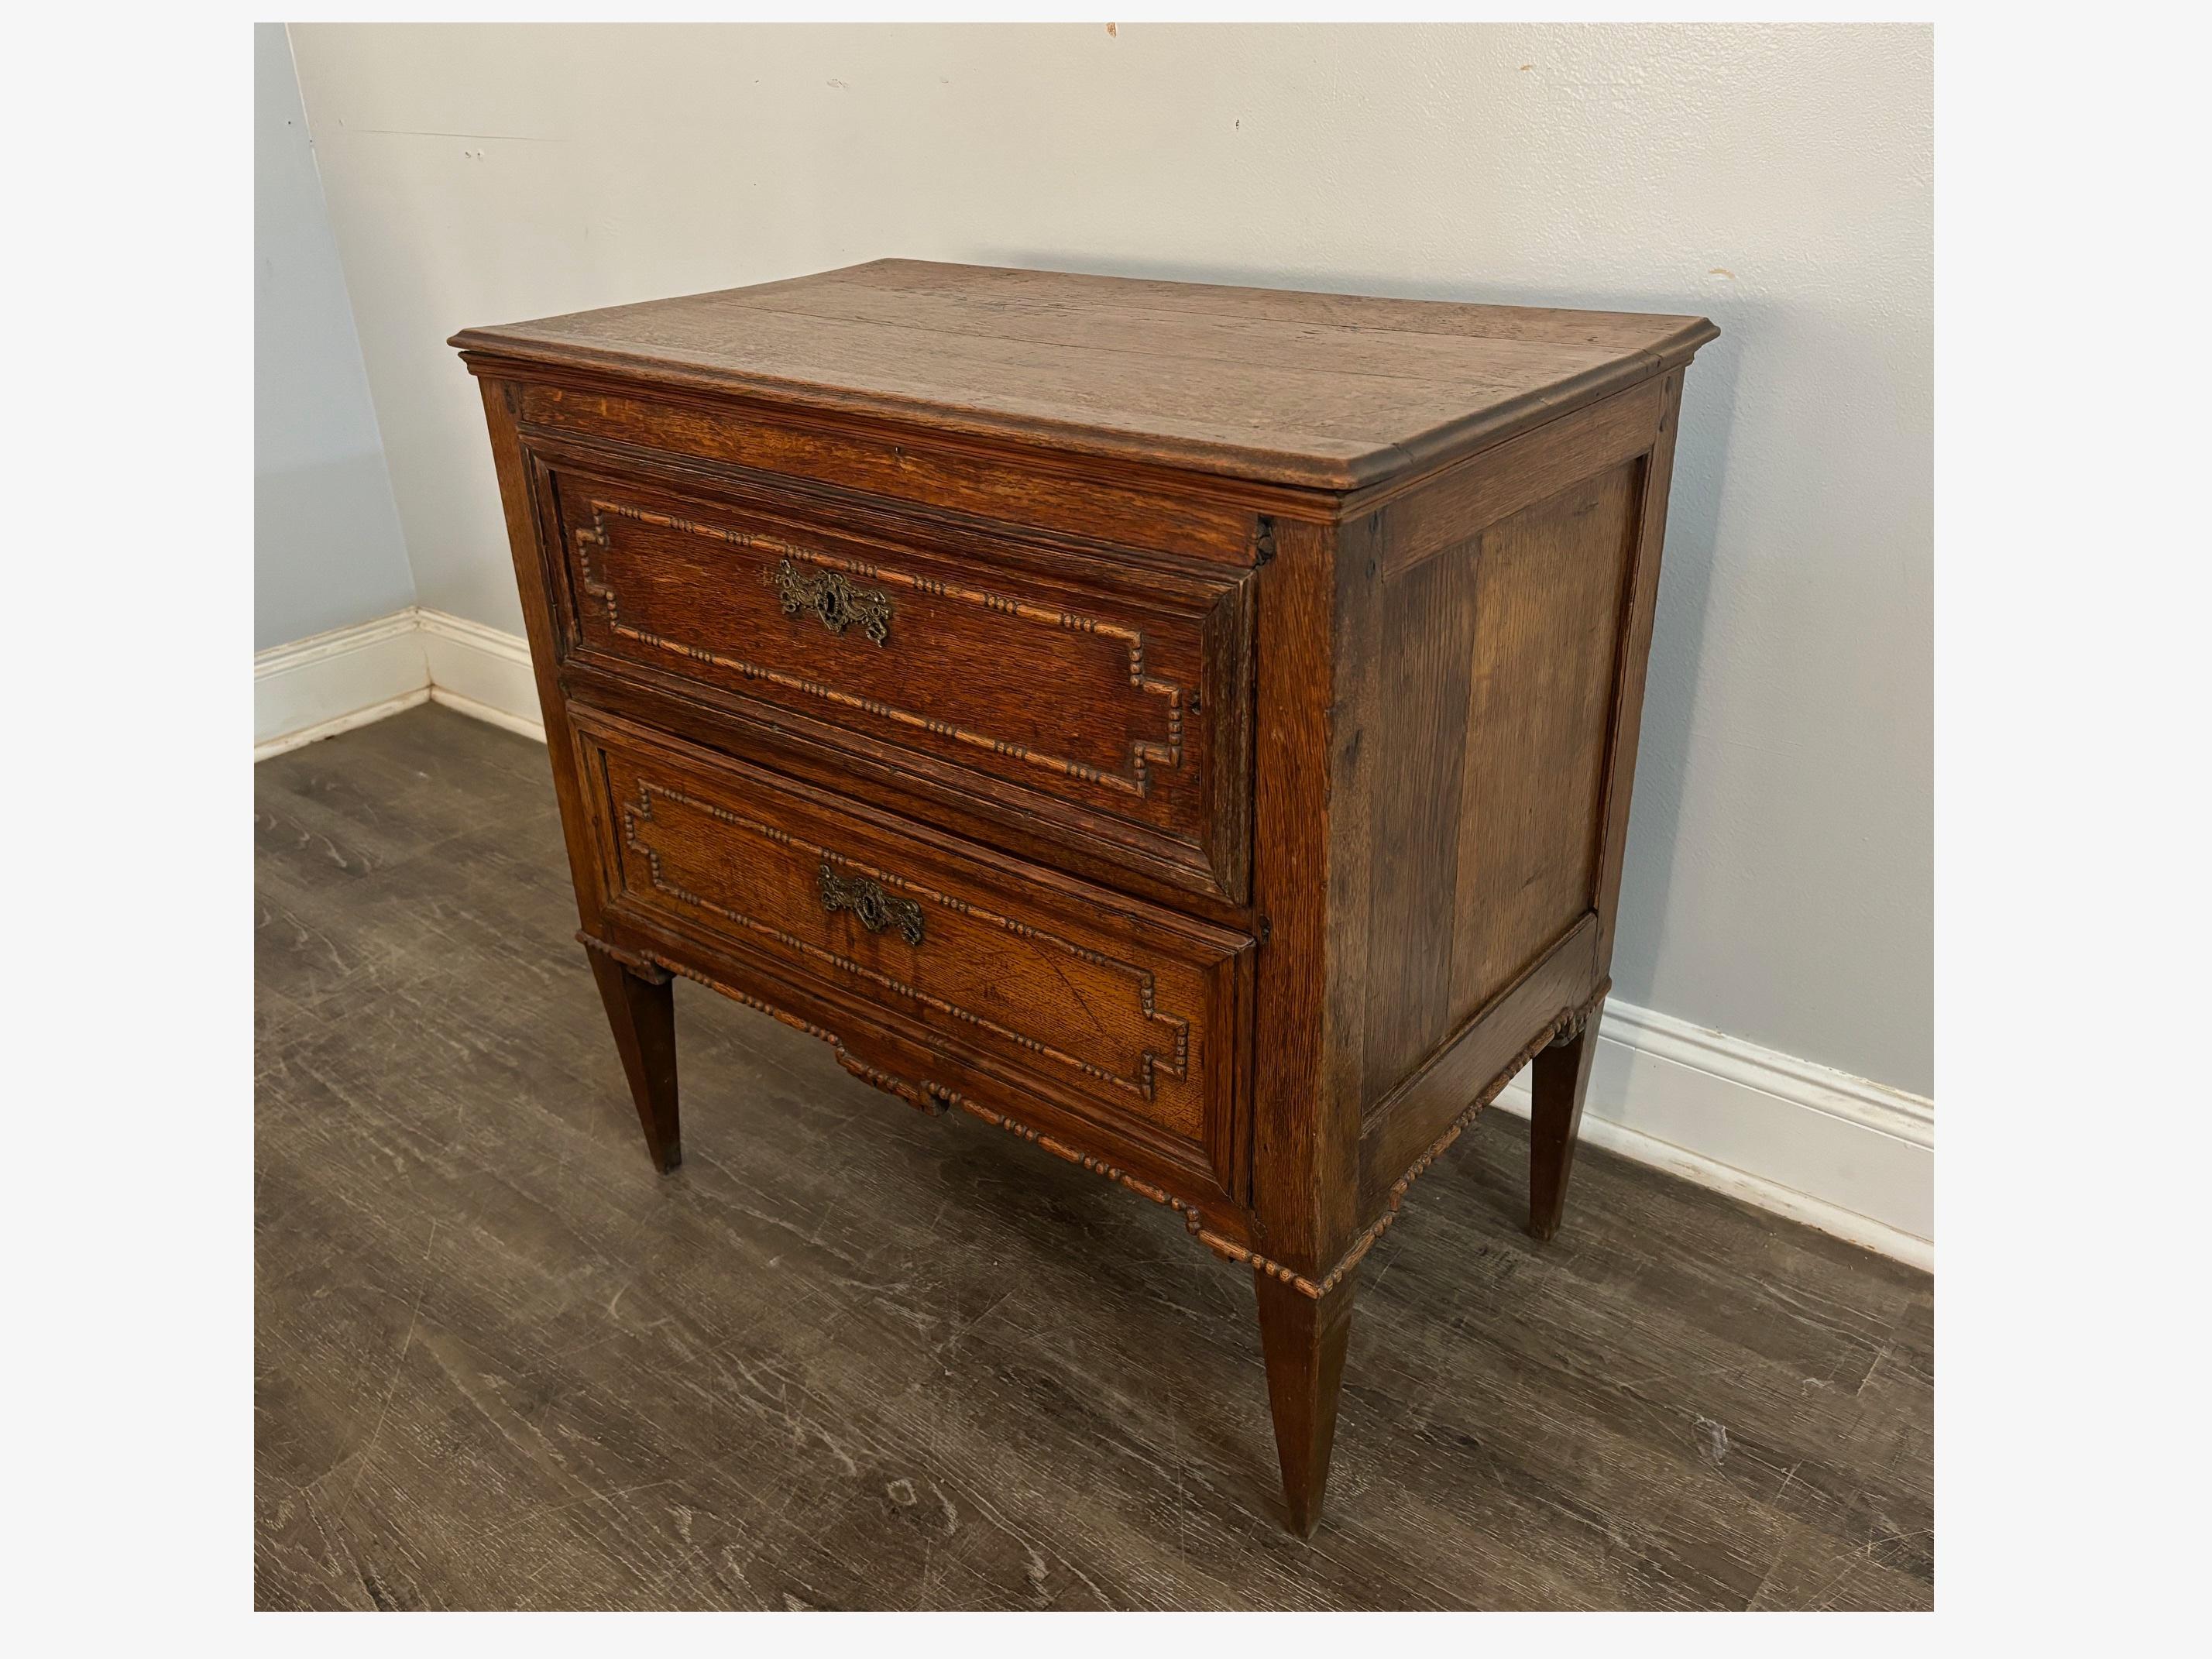 French 18th Century Small Commode In Good Condition For Sale In Stockbridge, GA